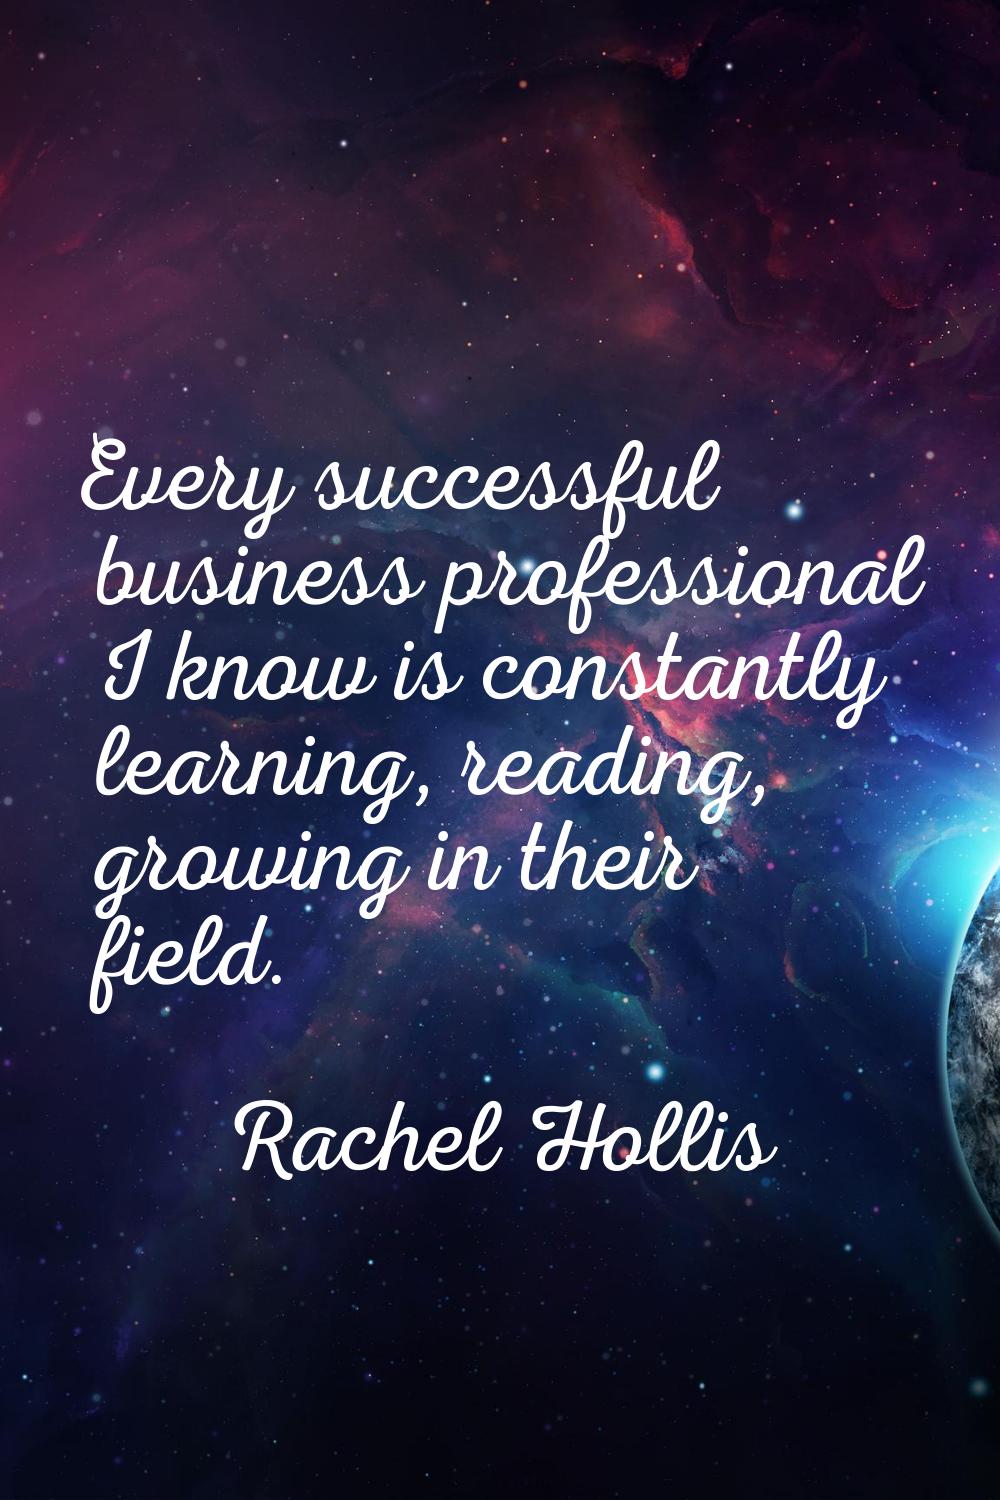 Every successful business professional I know is constantly learning, reading, growing in their fie